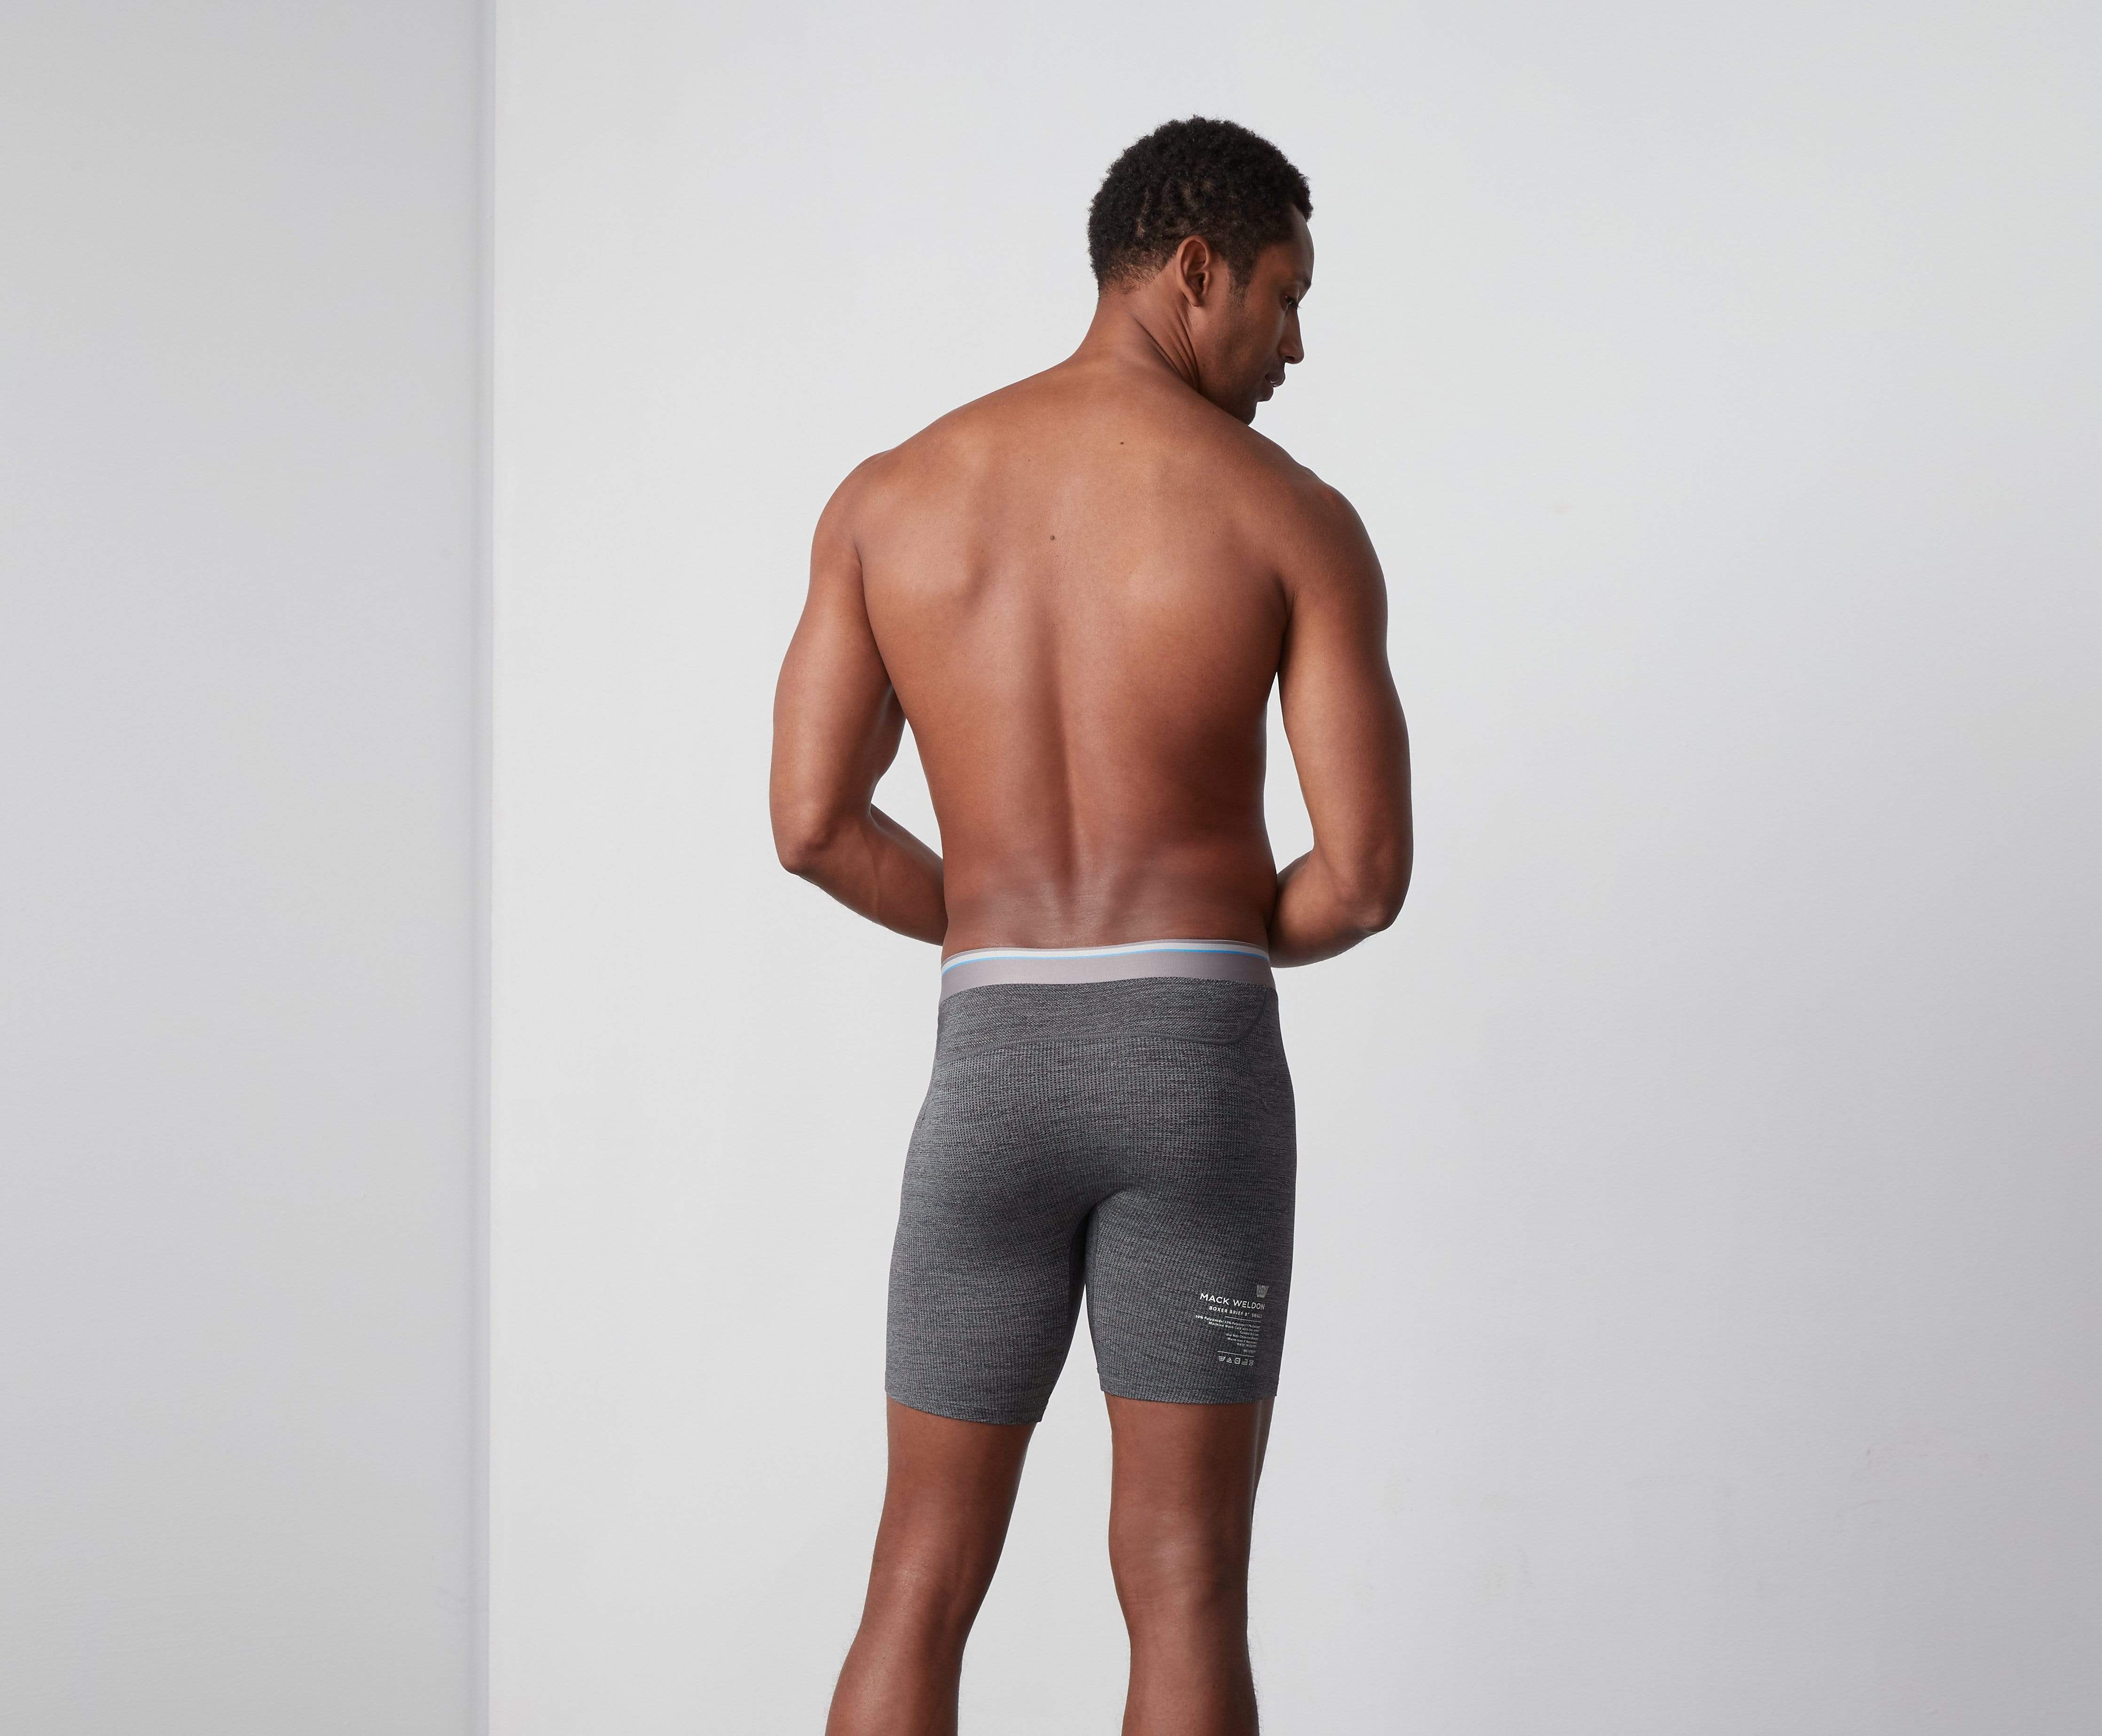 Mack Weldon After-Christmas Sale 2022: Save up to 34% Off Underwear